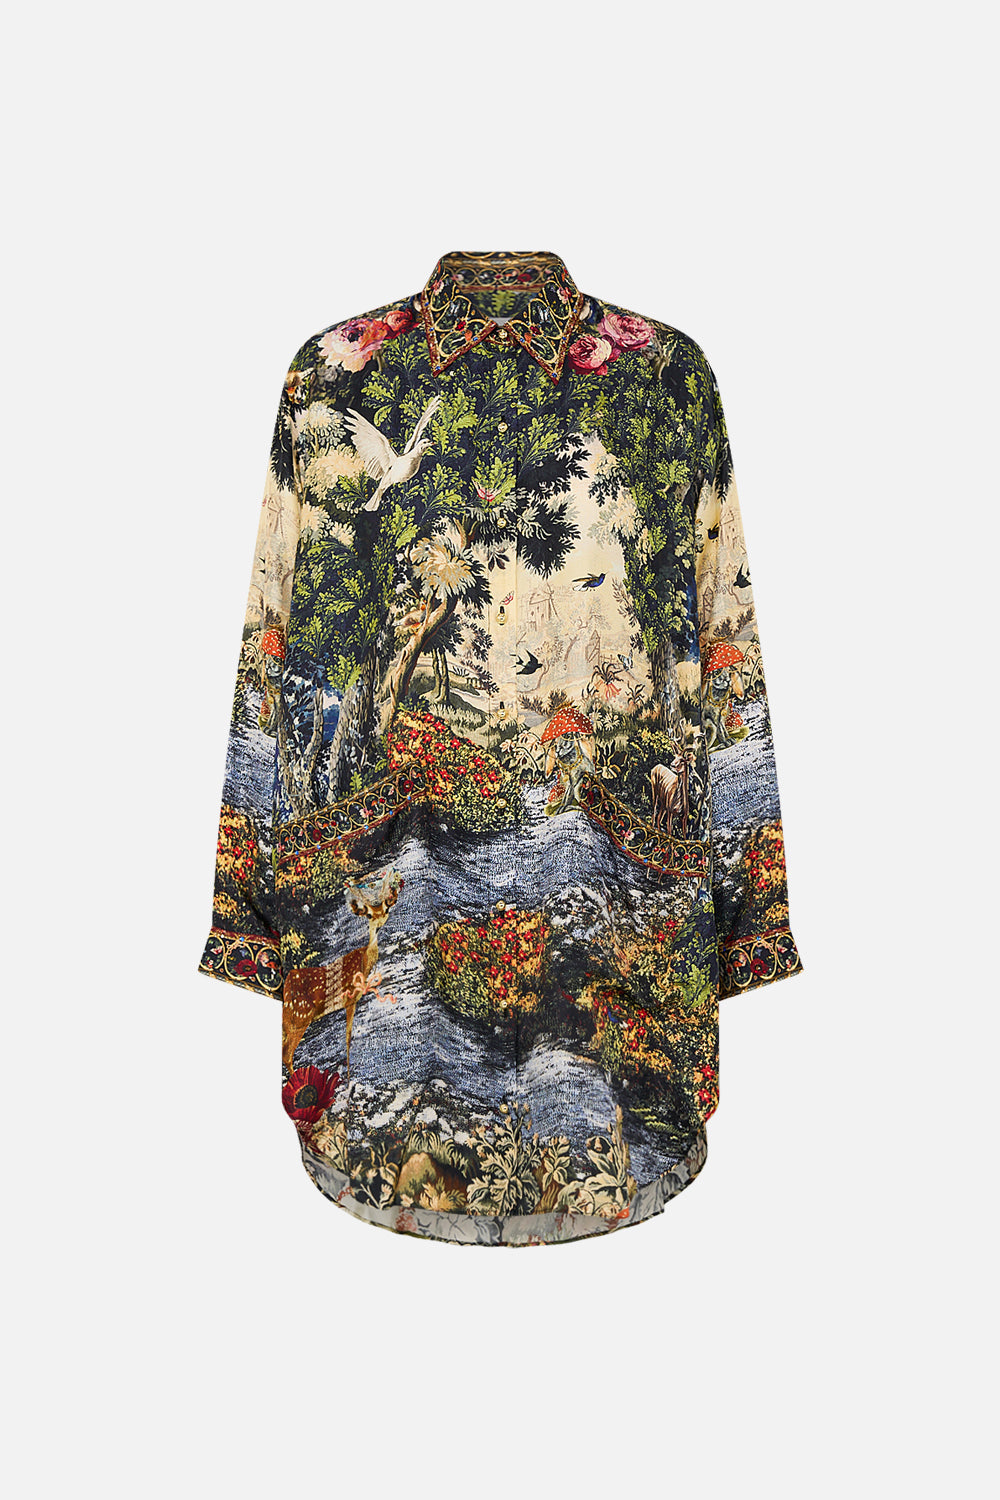 CAMILLA Floral Shirt Tunic with Pockets in Tapestry Totems